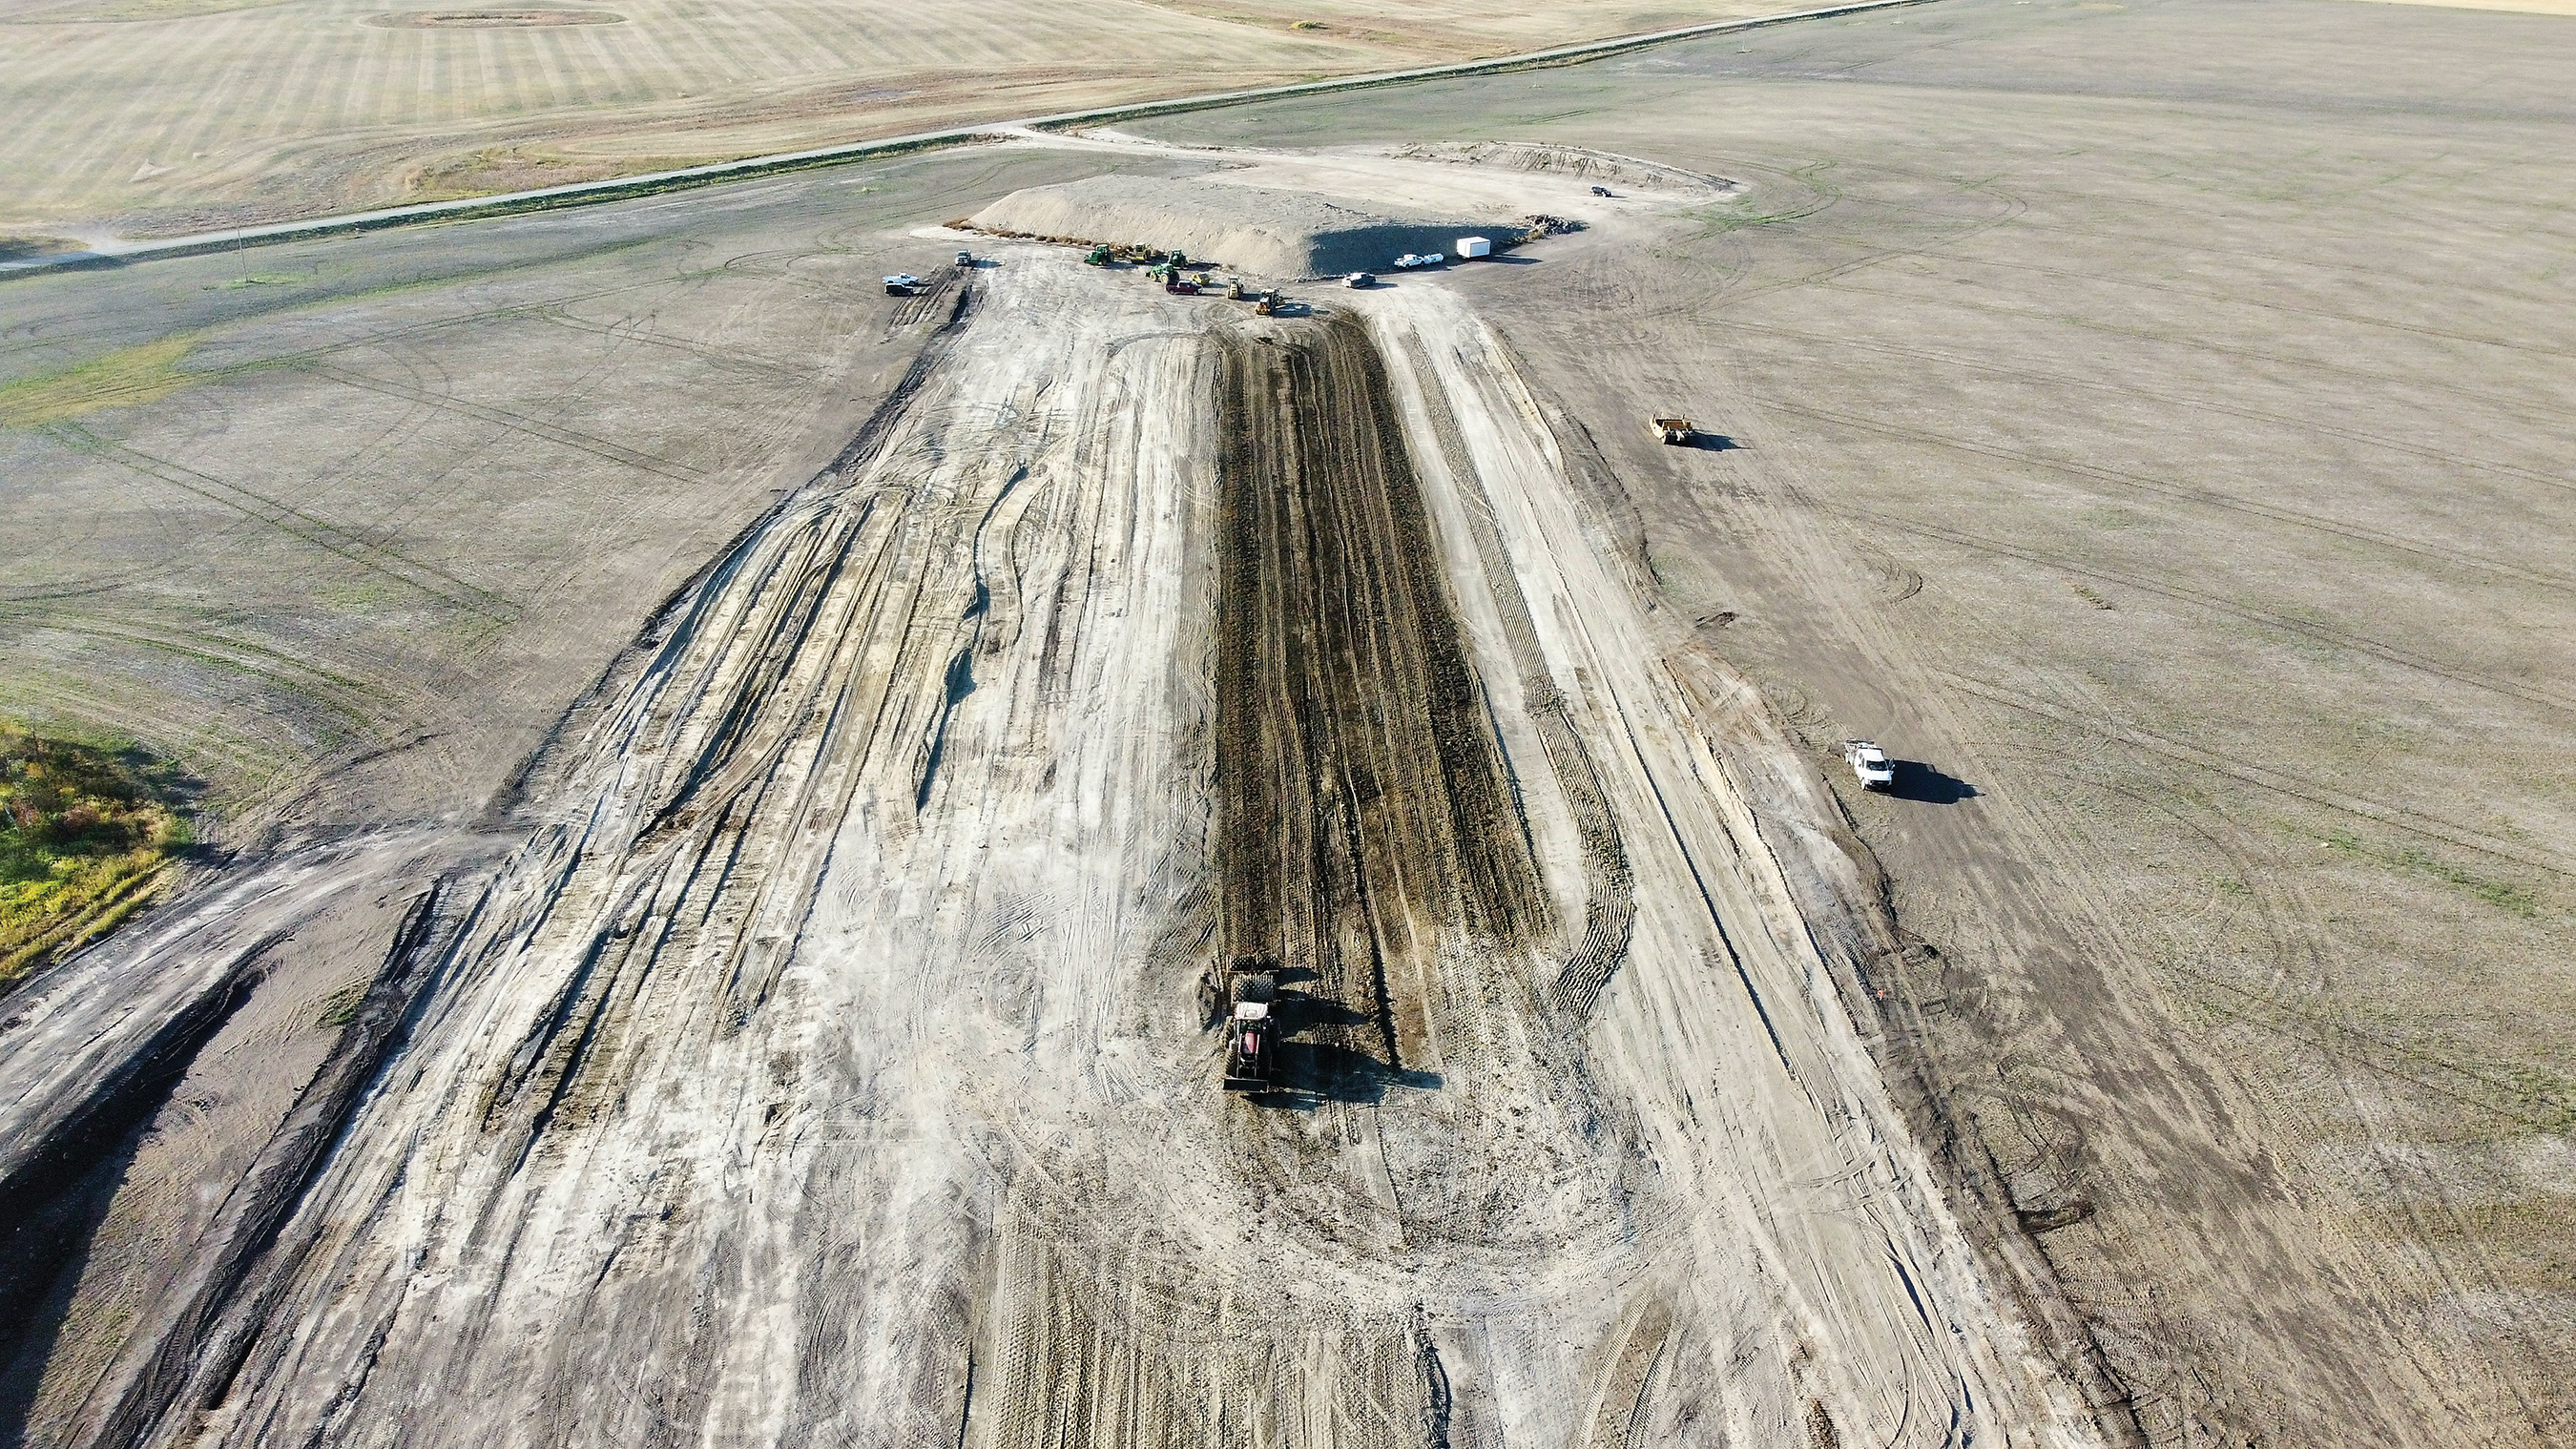 Work on the new runway at Moosomin airport is well underway.